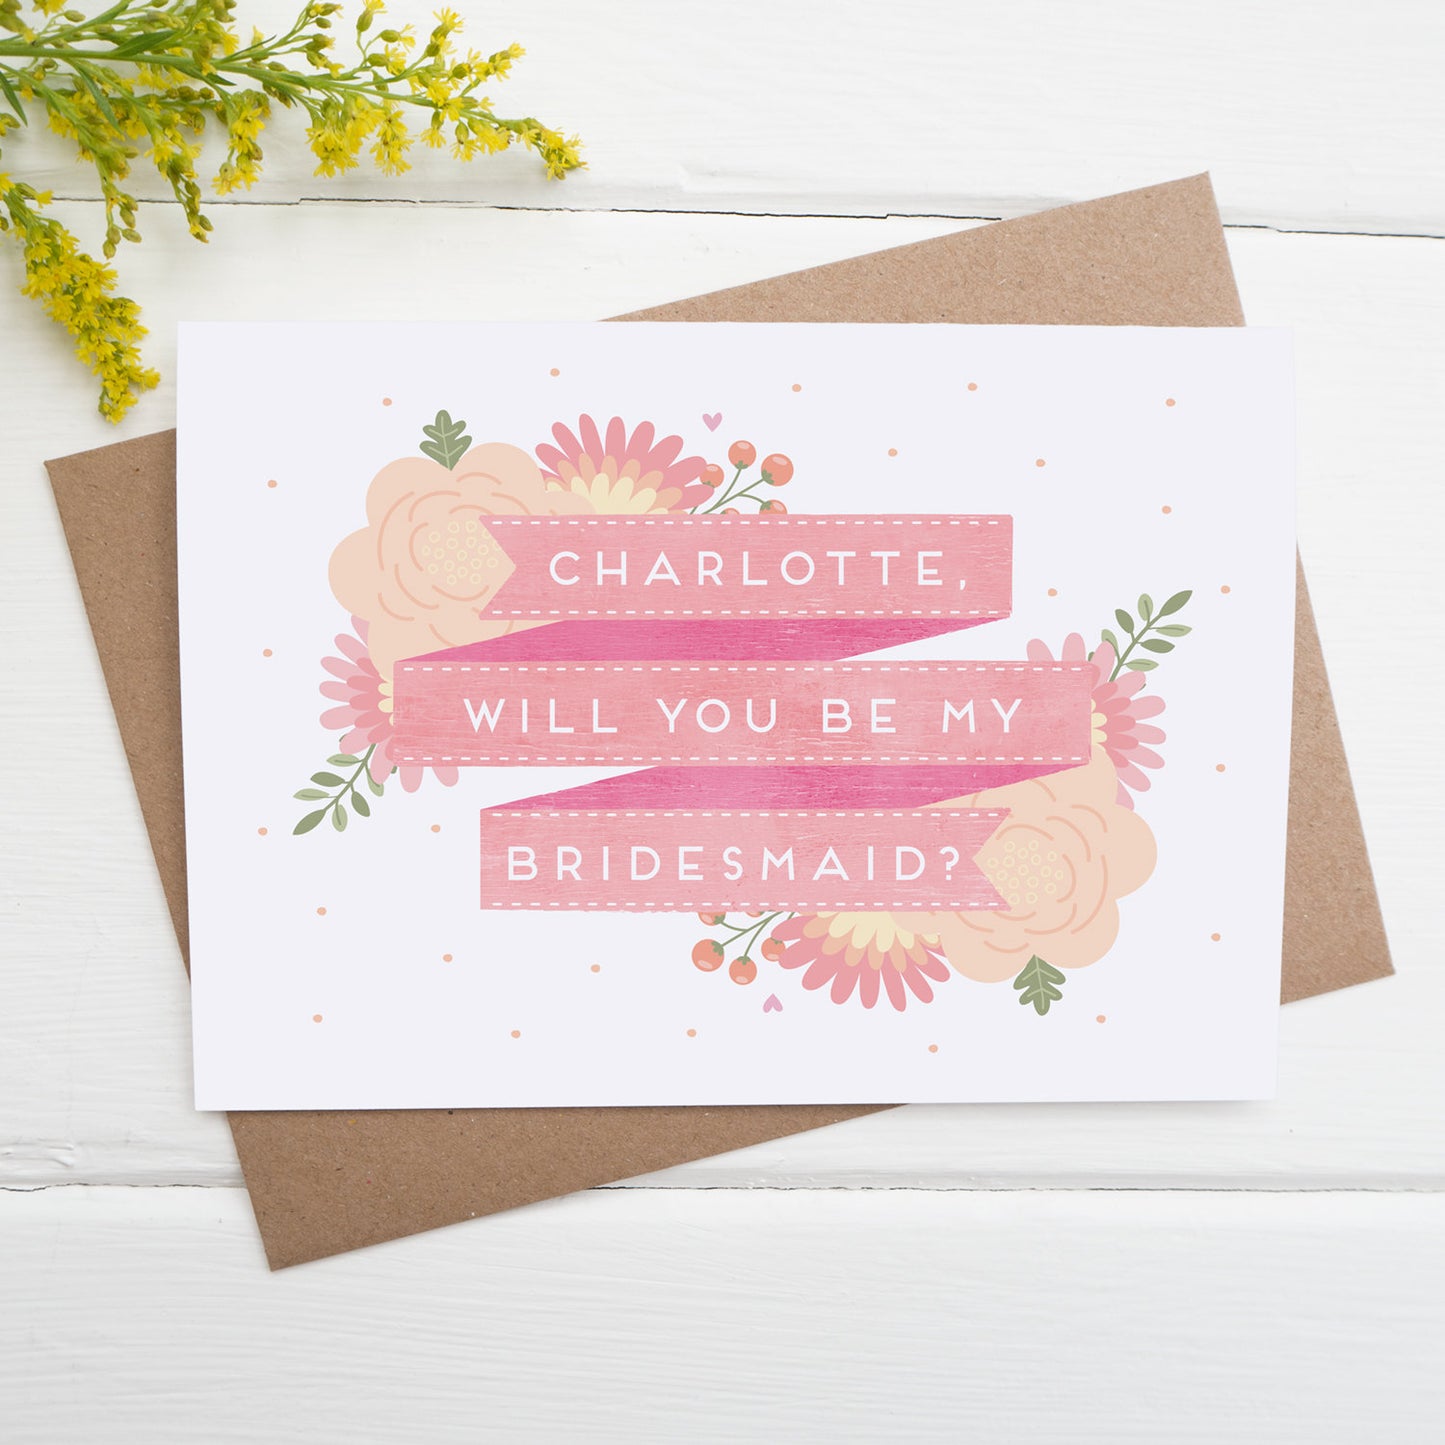 Personalised will you be my bridesmaid card in pink